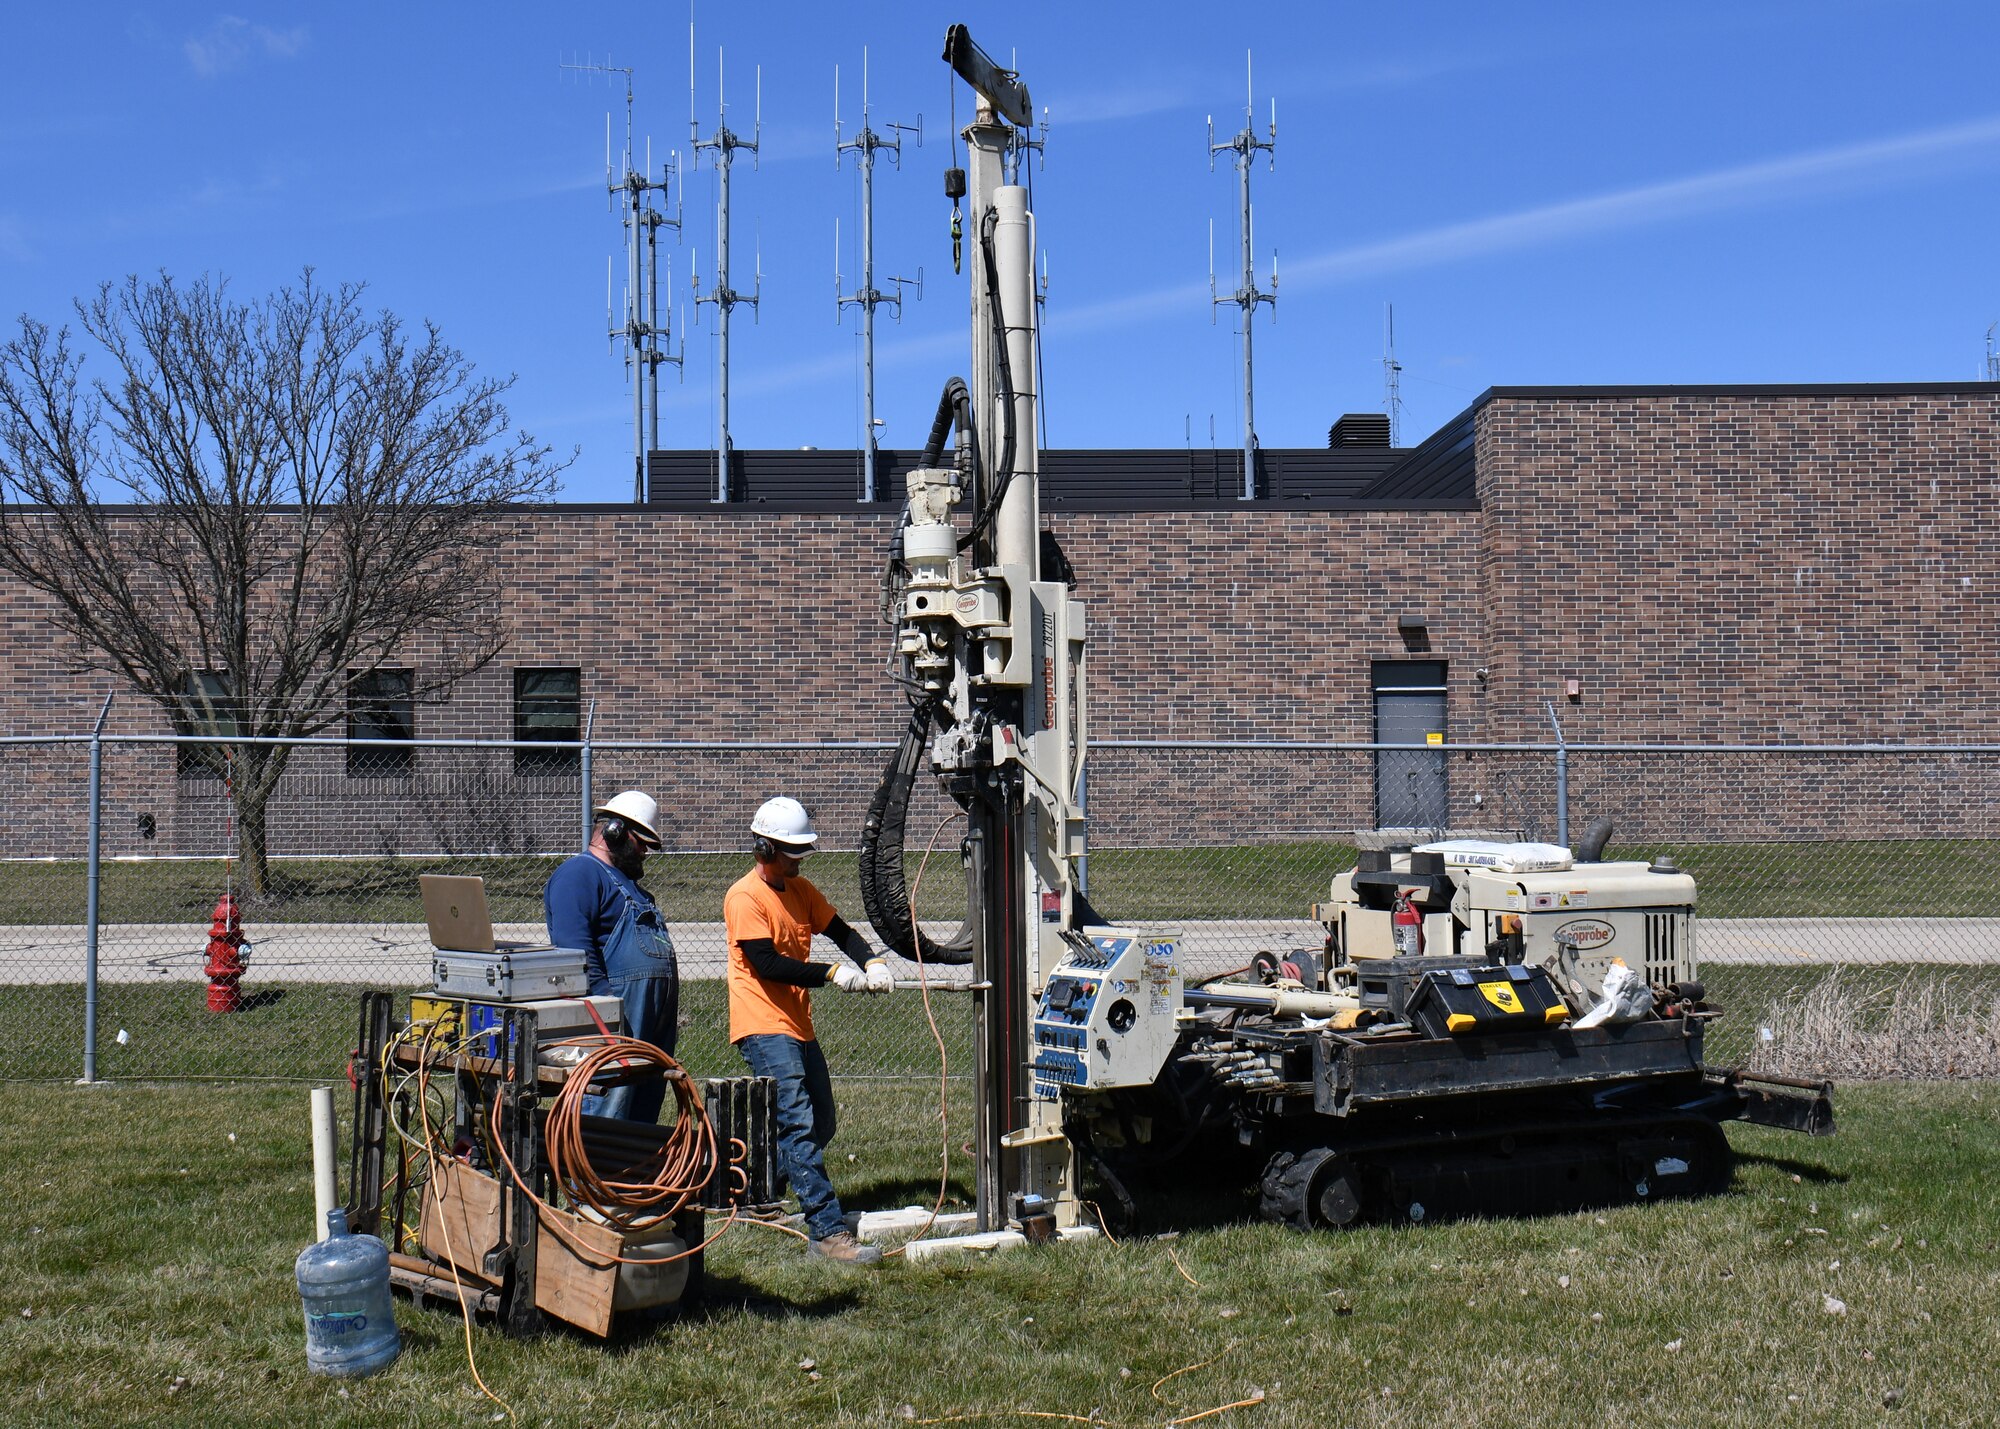 Drillers with Plains Environmental Services, Inc. conduct hydraulic profiling and electrical conductivity testing using a Geoprobe mobile drilling rig during a remedial investigation into the presence of Per- and Polyfluoroalkyl substances at Truax Field in Madison, Wisconsin, March 22, 2022. (U.S. Air National Guard photo by Senior Master Sgt. Paul Gorman)